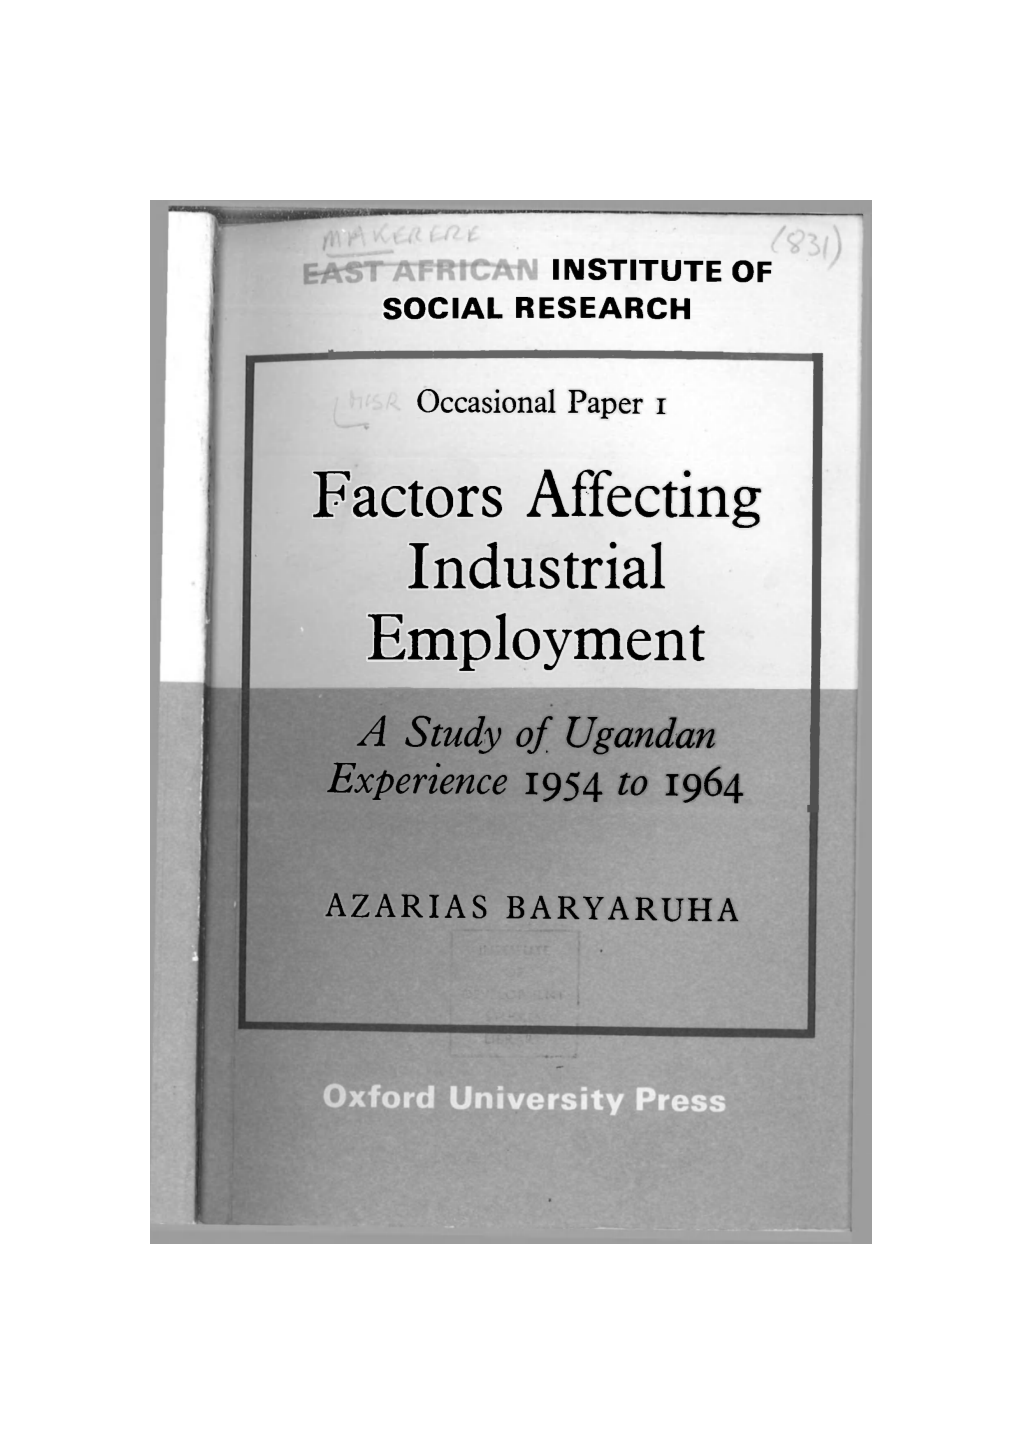 Factors Affecting Industrial Employment a Study of Ugandan Experience 1954 to 1964